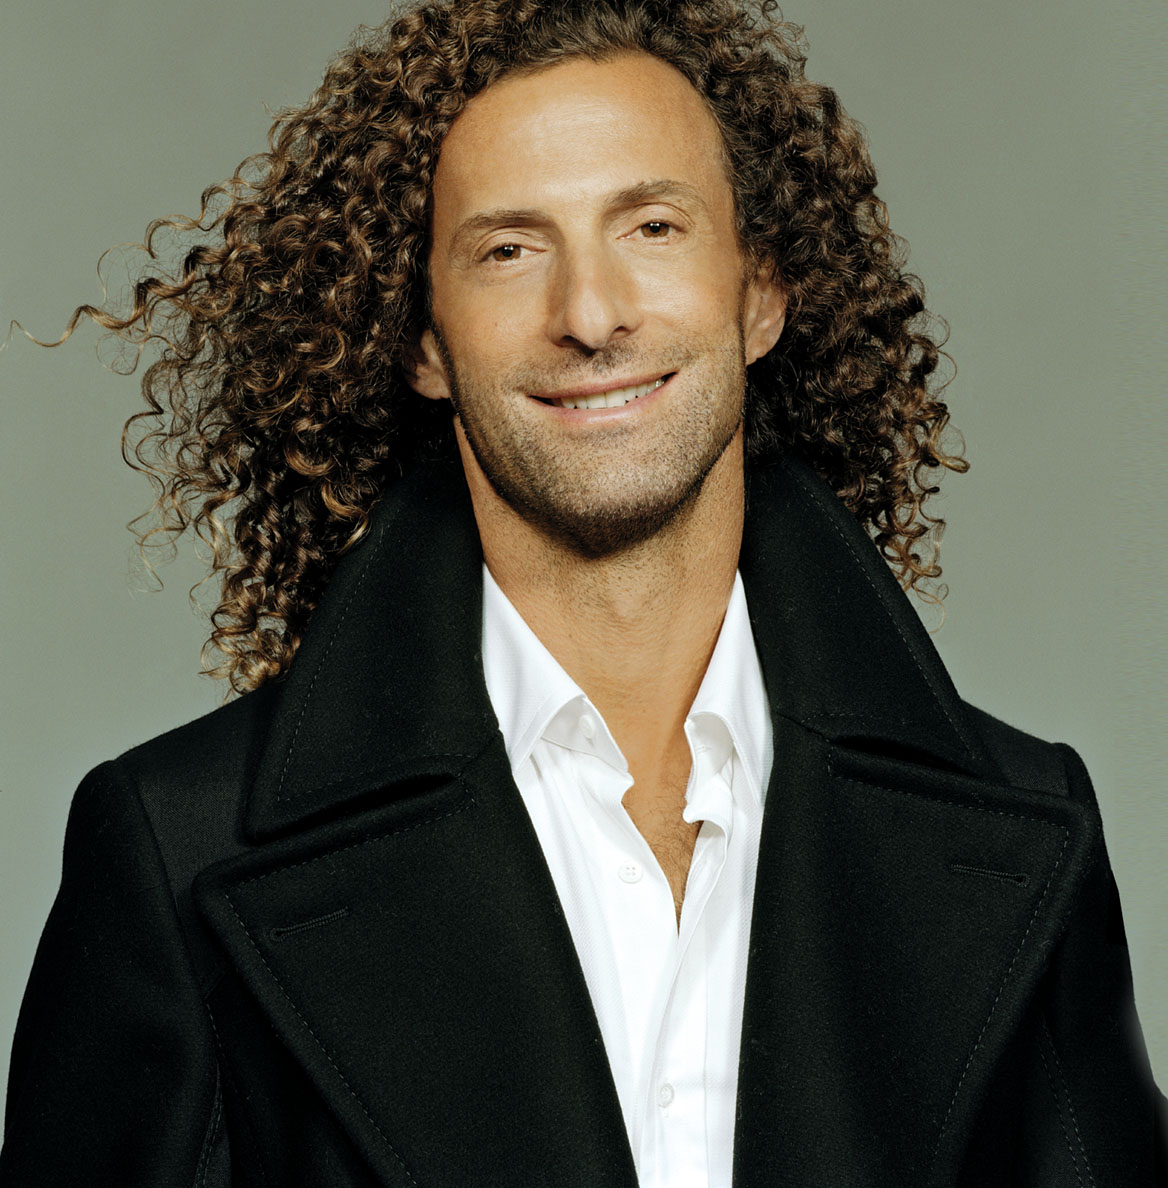 Kenny G Images Gallery